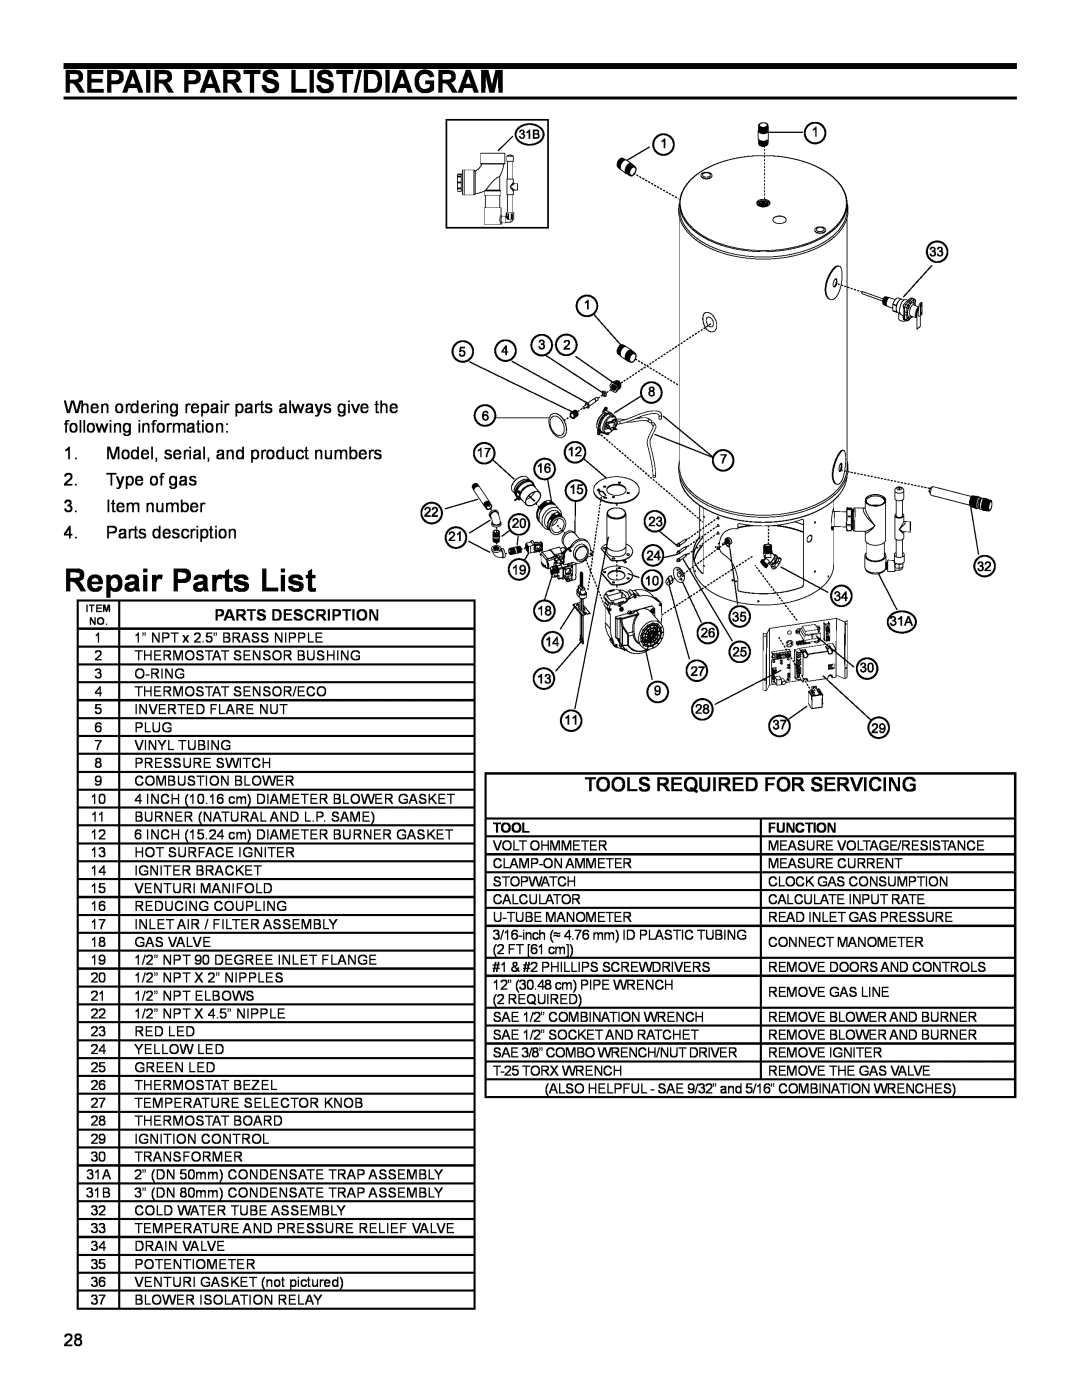 Polaris PC 175-50 3NV, PC 150-34 2NV, PC 130-34 2NV, PC 199-50 3NV Repair Parts List/Diagram, Tools Required For Servicing 